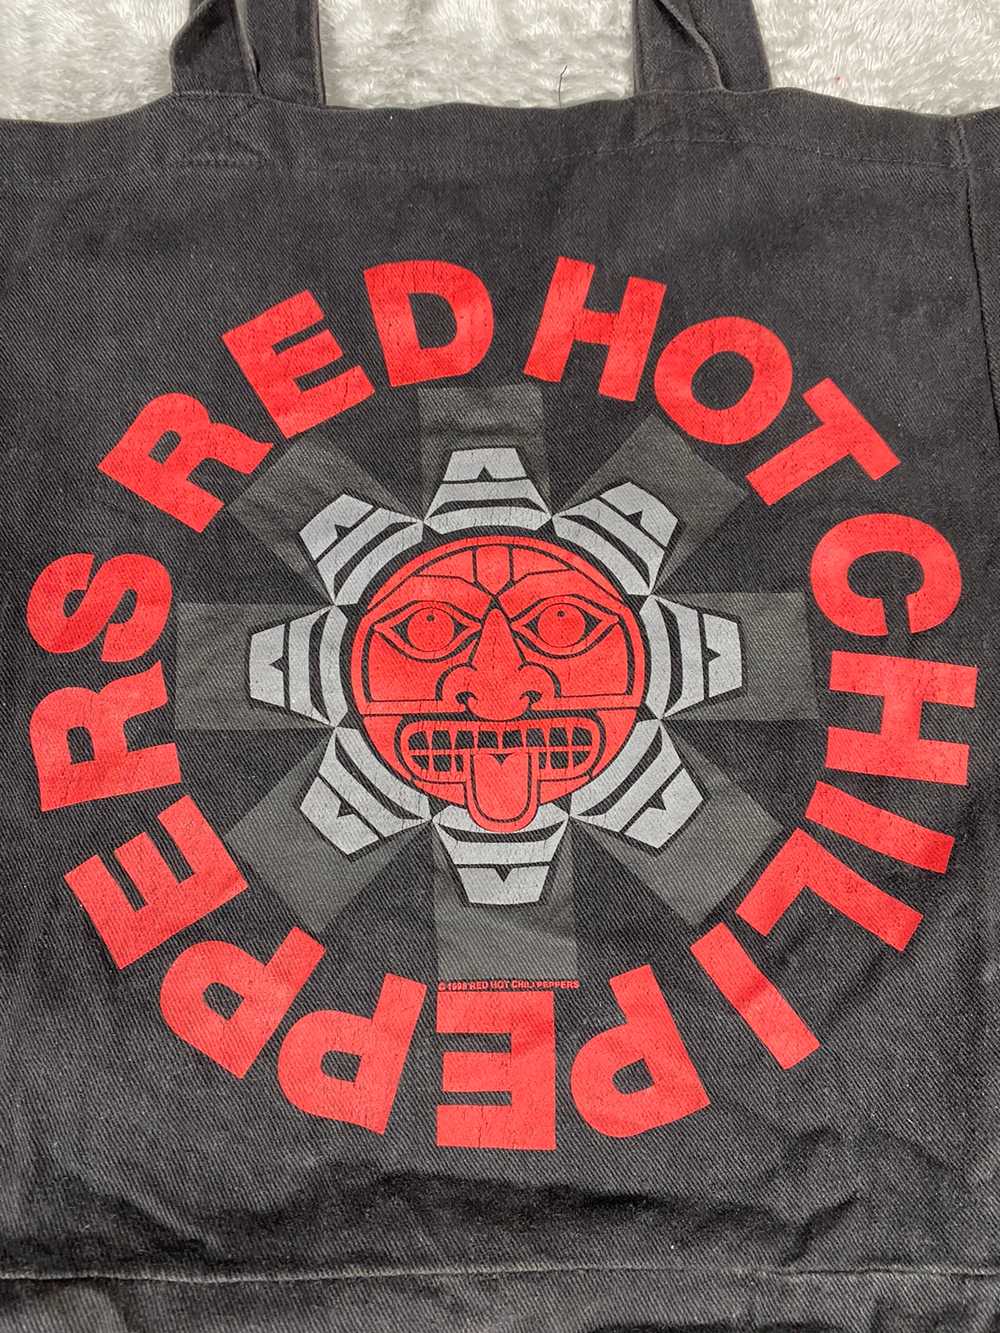 Vintage - Vintage Bootleg Red Hot Chili Peppers - image 3